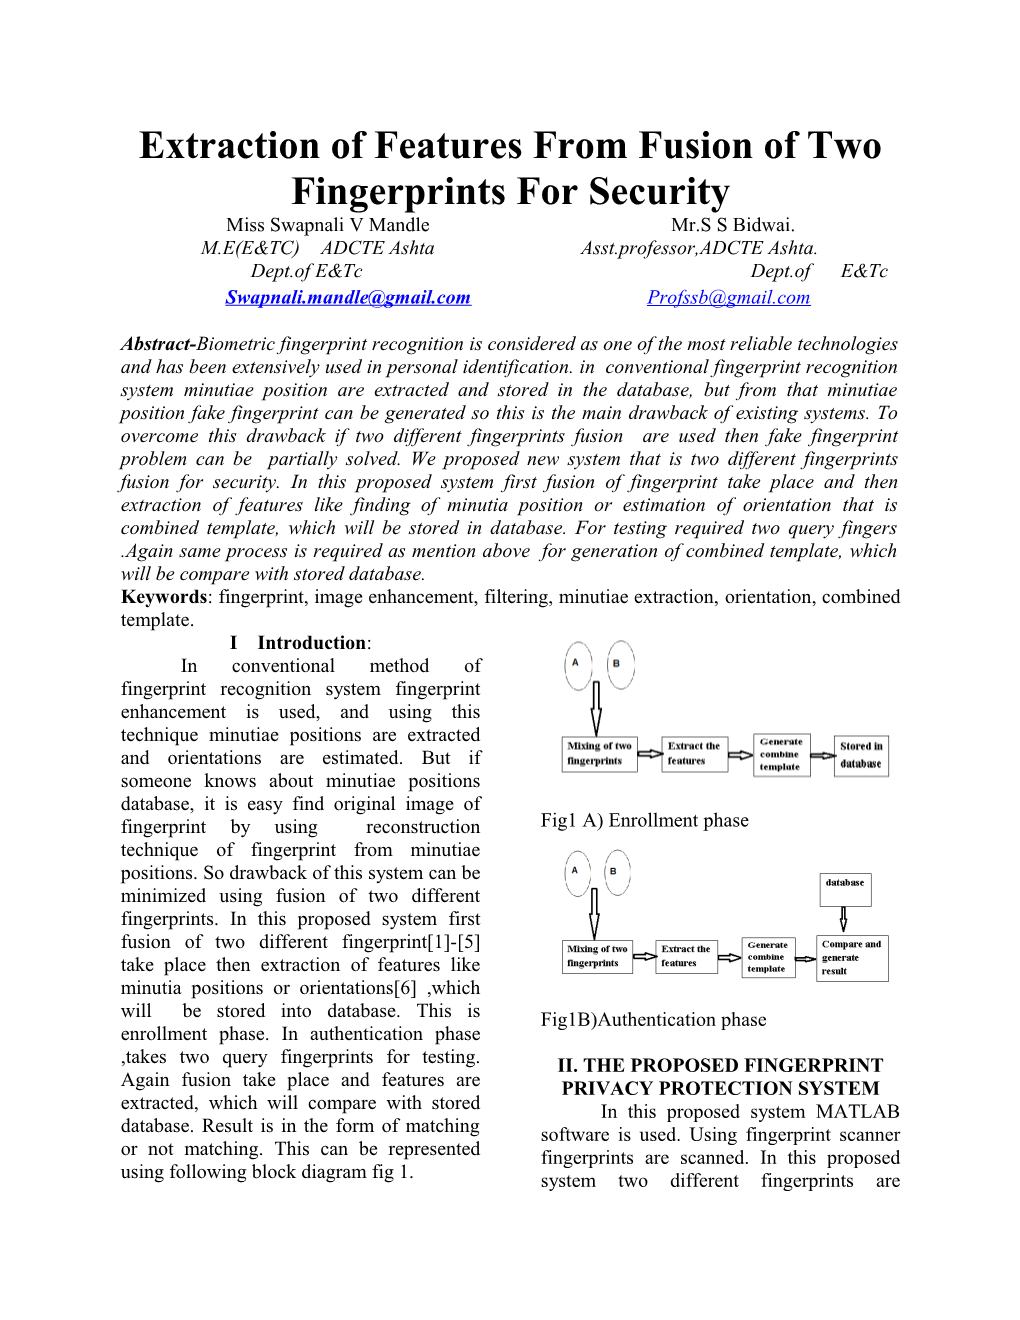 Extraction of Features from Fusion of Two Fingerprints for Security